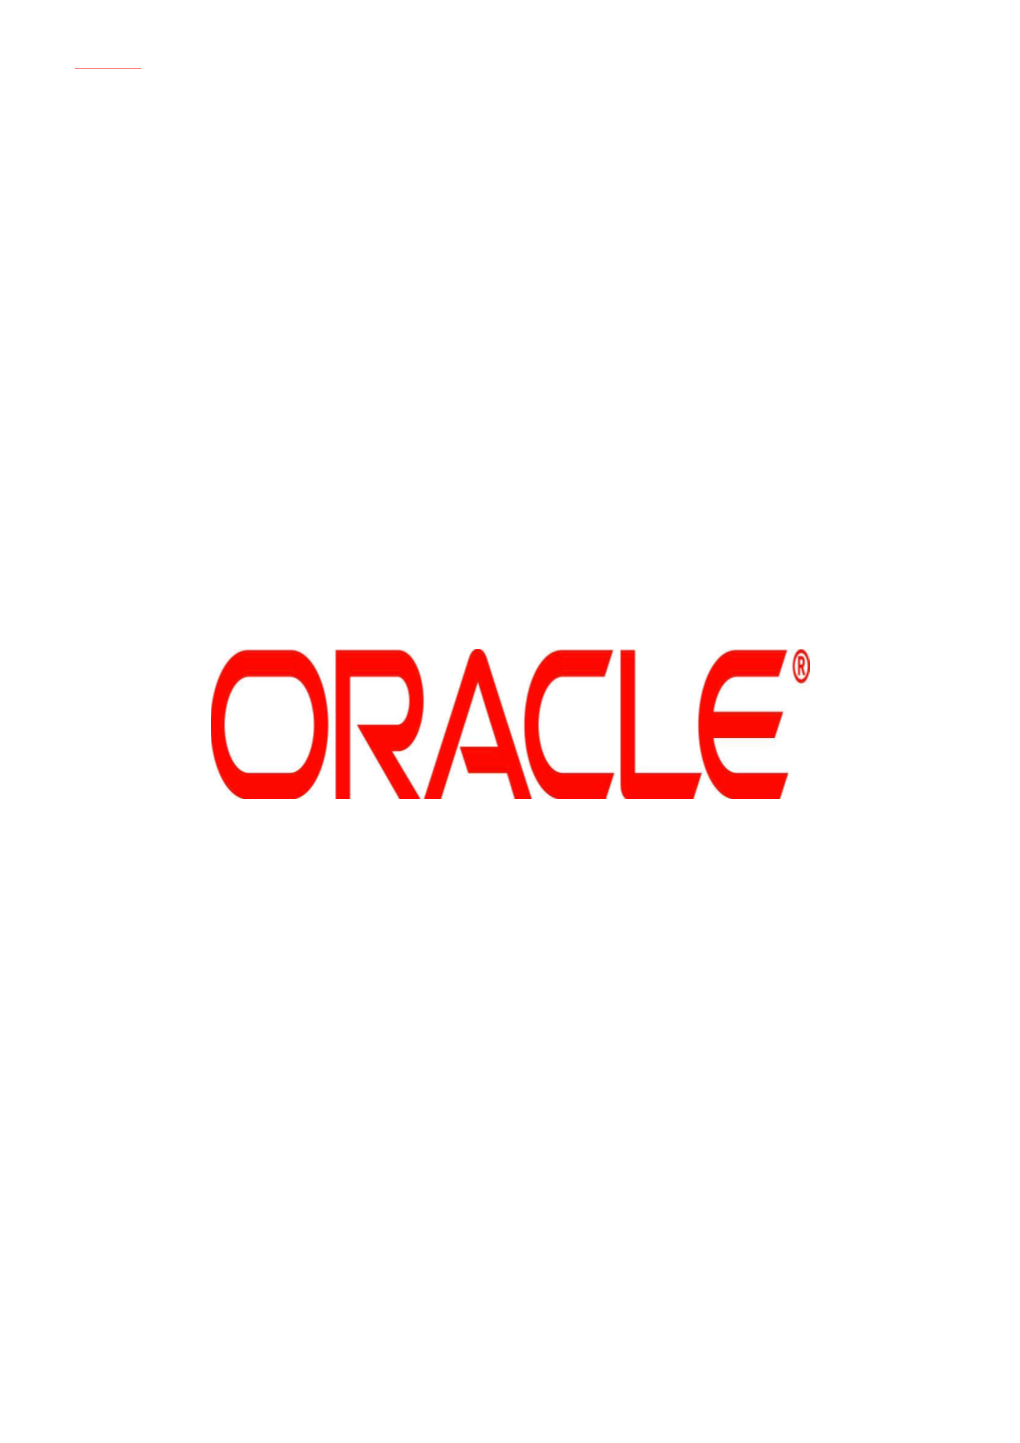 Oracle SQL Developer 2.1: an Overview and New Features the Following Is Intended to Outline Our General Product Direction